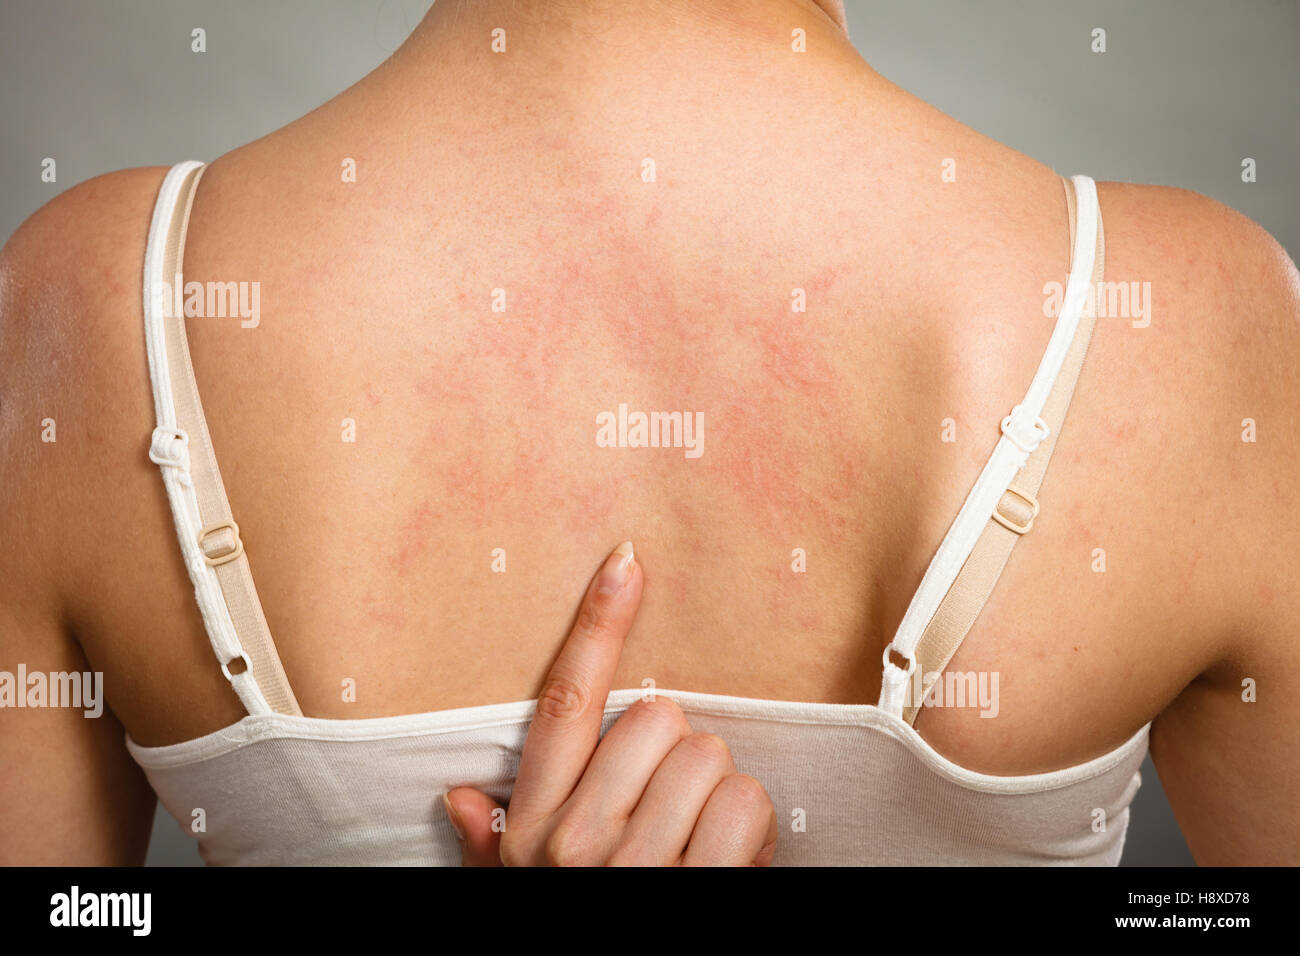 Health problem, skin diseases. Young woman showing her itchy back